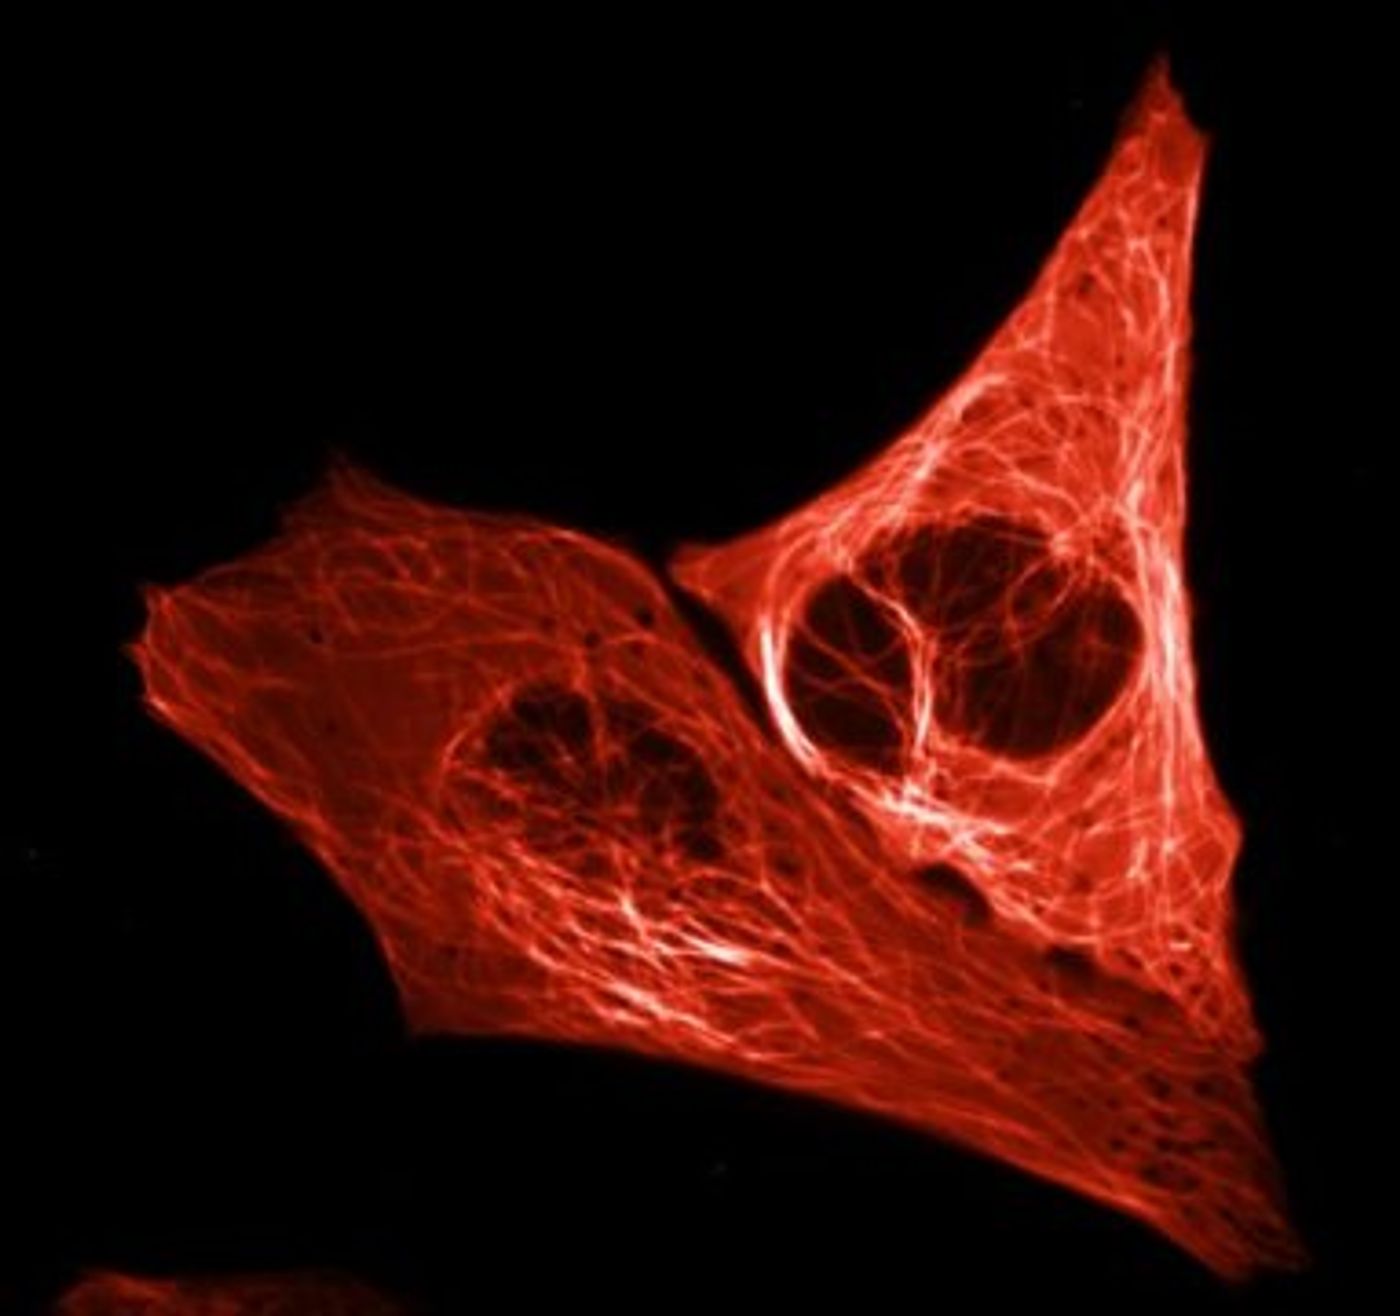 The microtubule cytoskeleton in mScarlet. These are protein fibers and enable transport within the cell. / Credit: Captured by: Lindsay Haarbosch, MSc, UvA